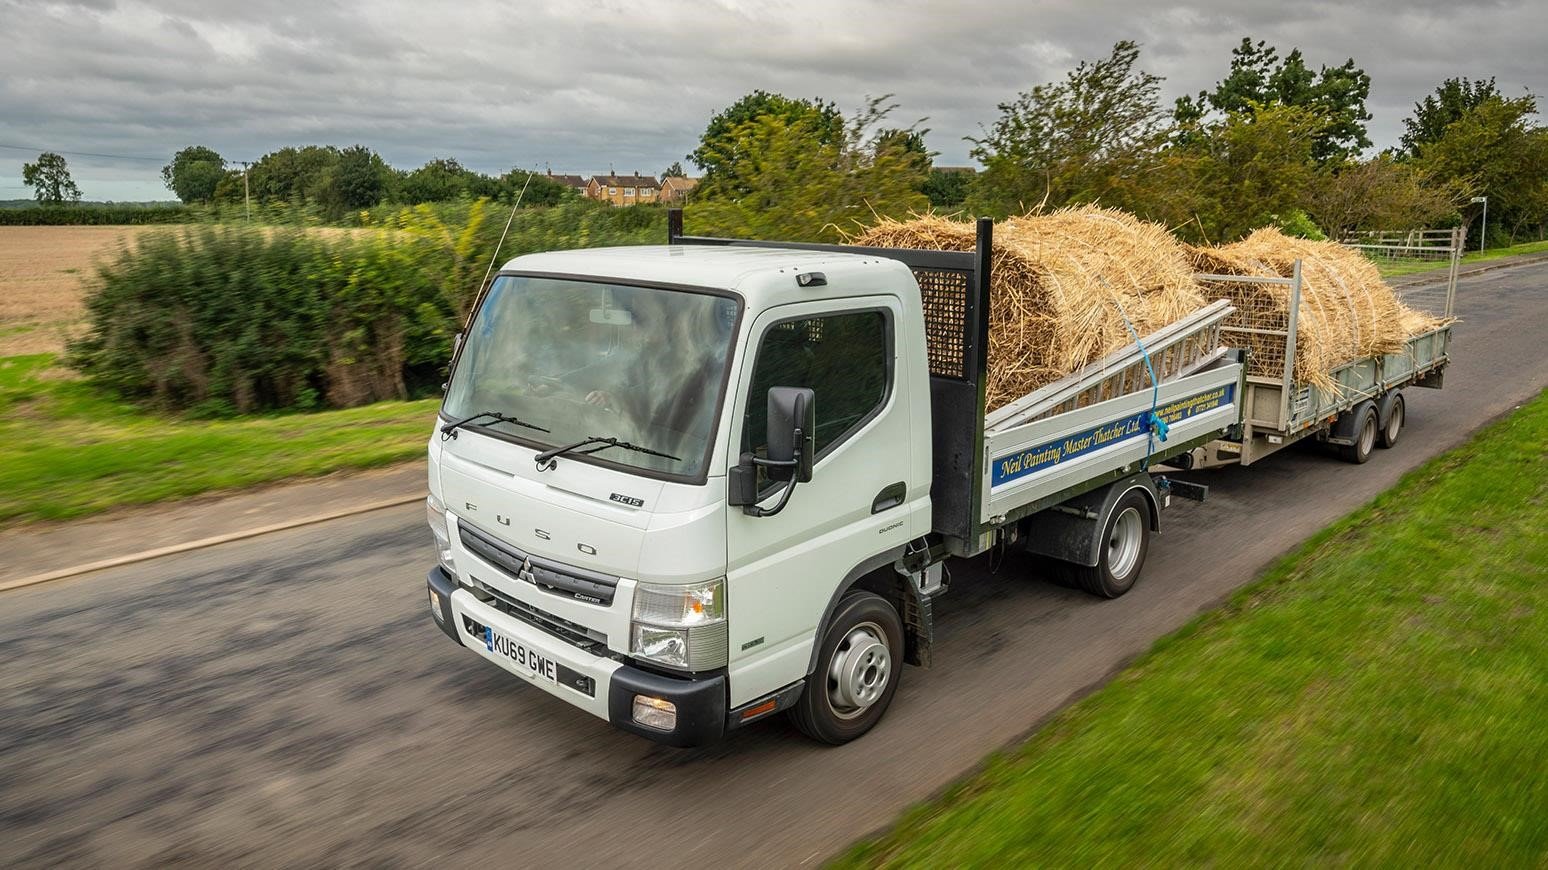 Thatching Services Provider Purchases 3.5-Tonne FUSO Canter 3C15 Tipper Truck